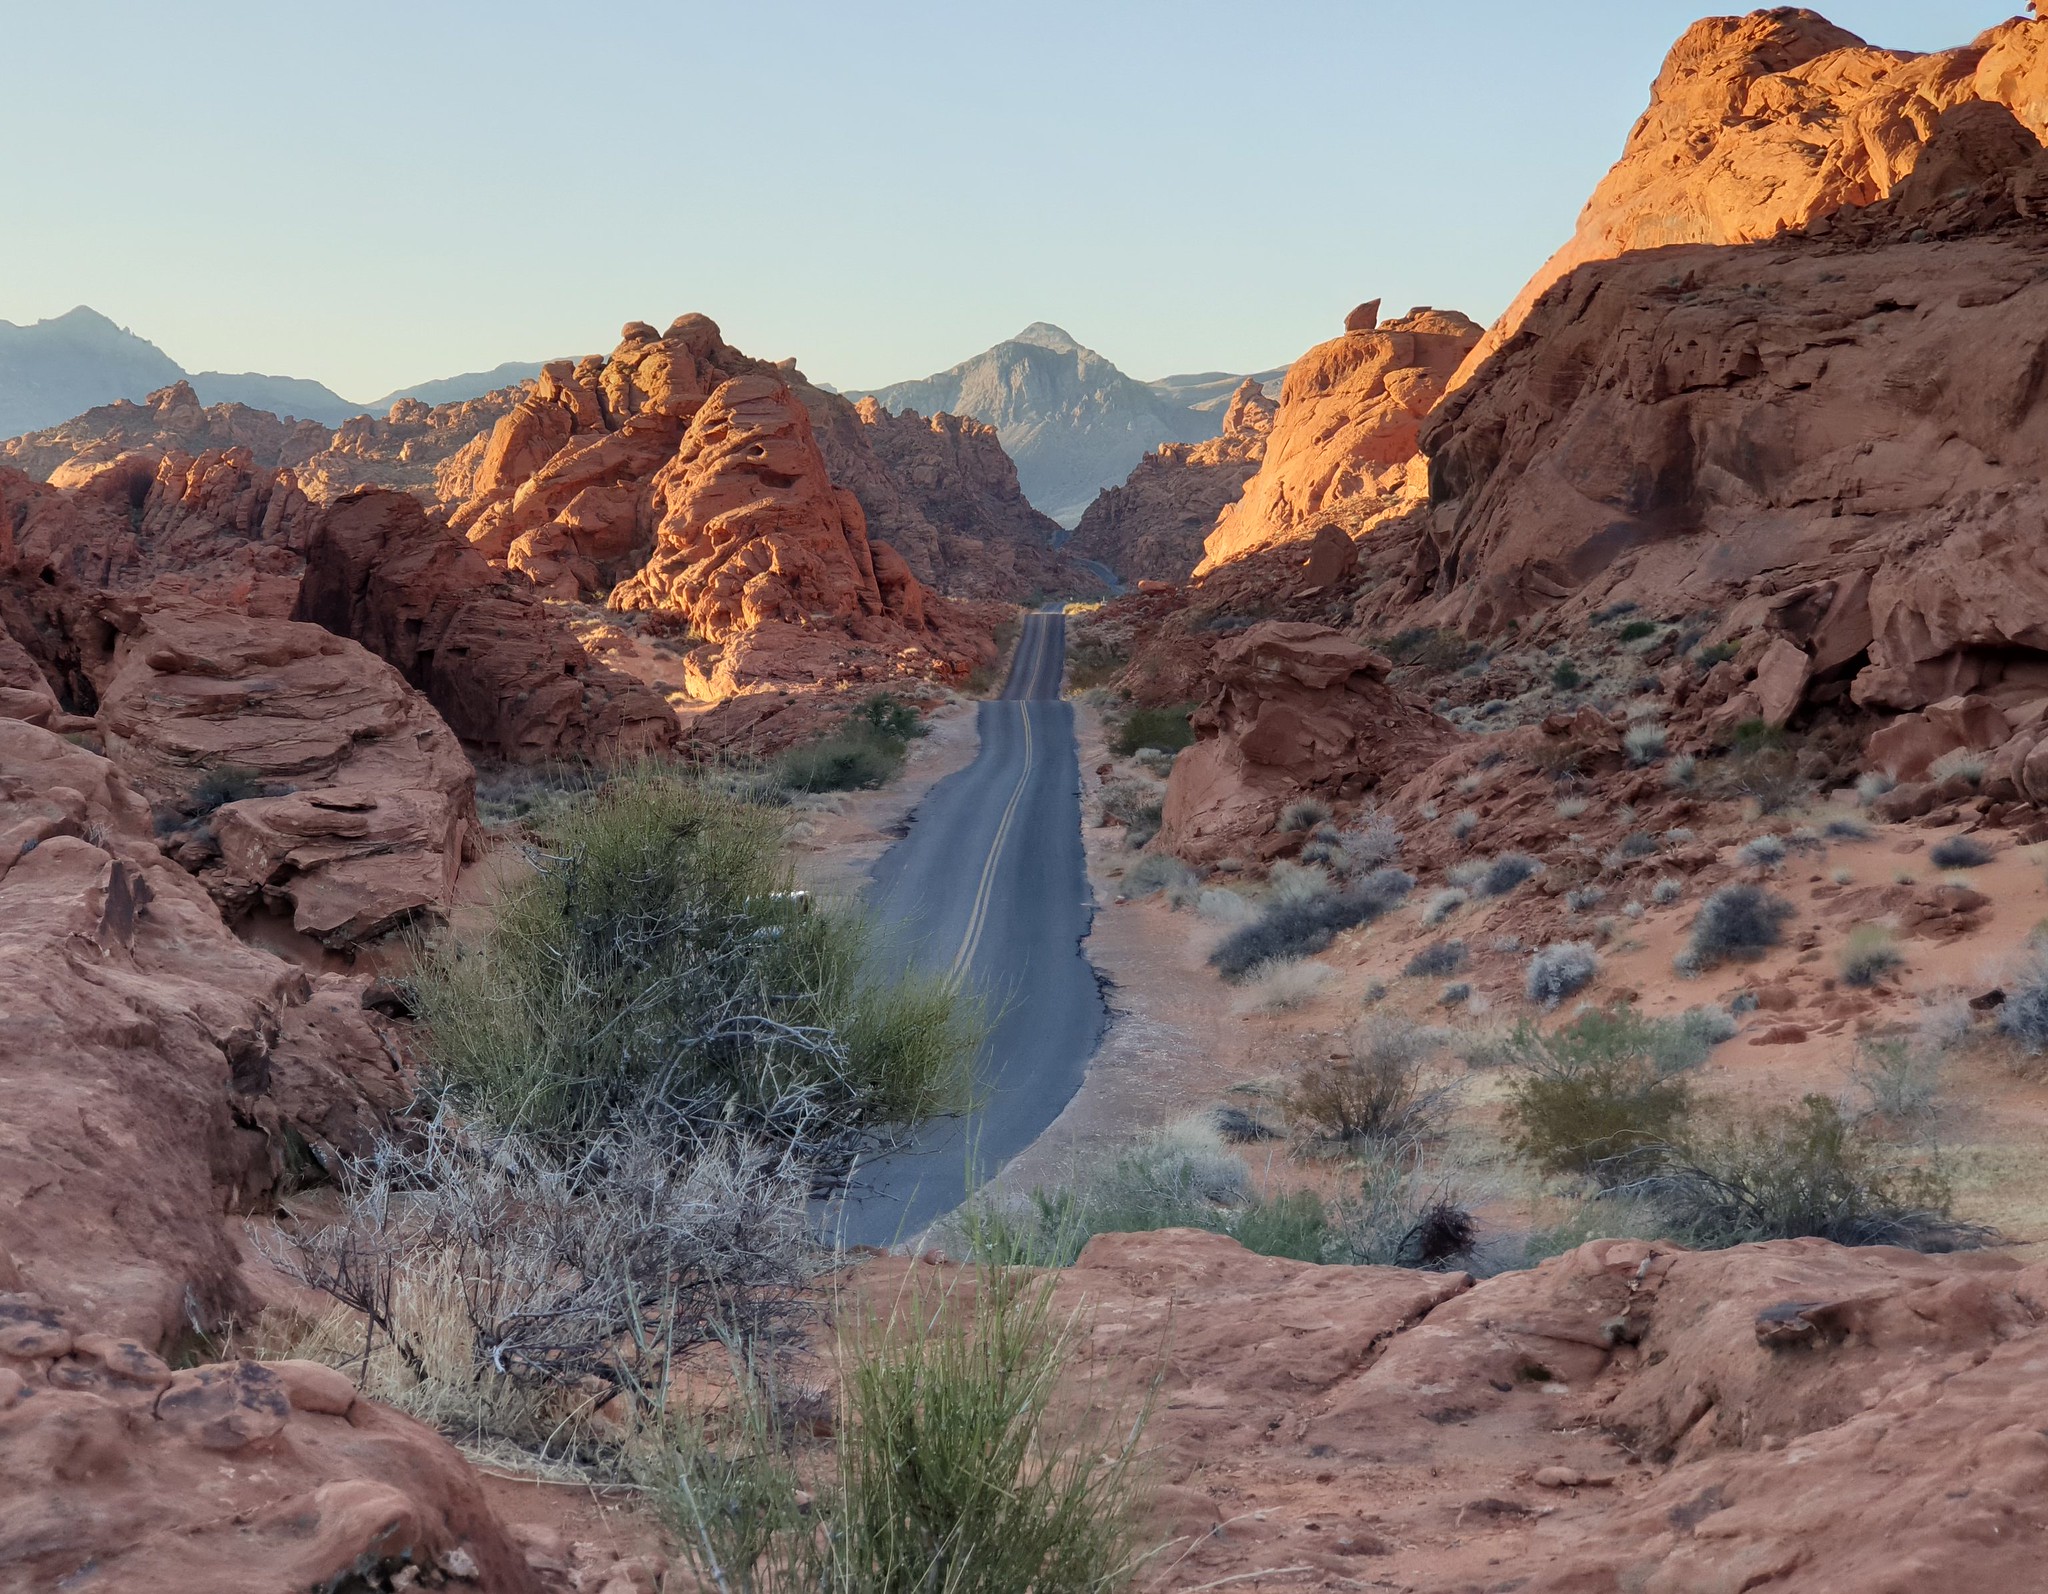 Mouse Tank Road in Valley of Fire State Park near Las Vegas